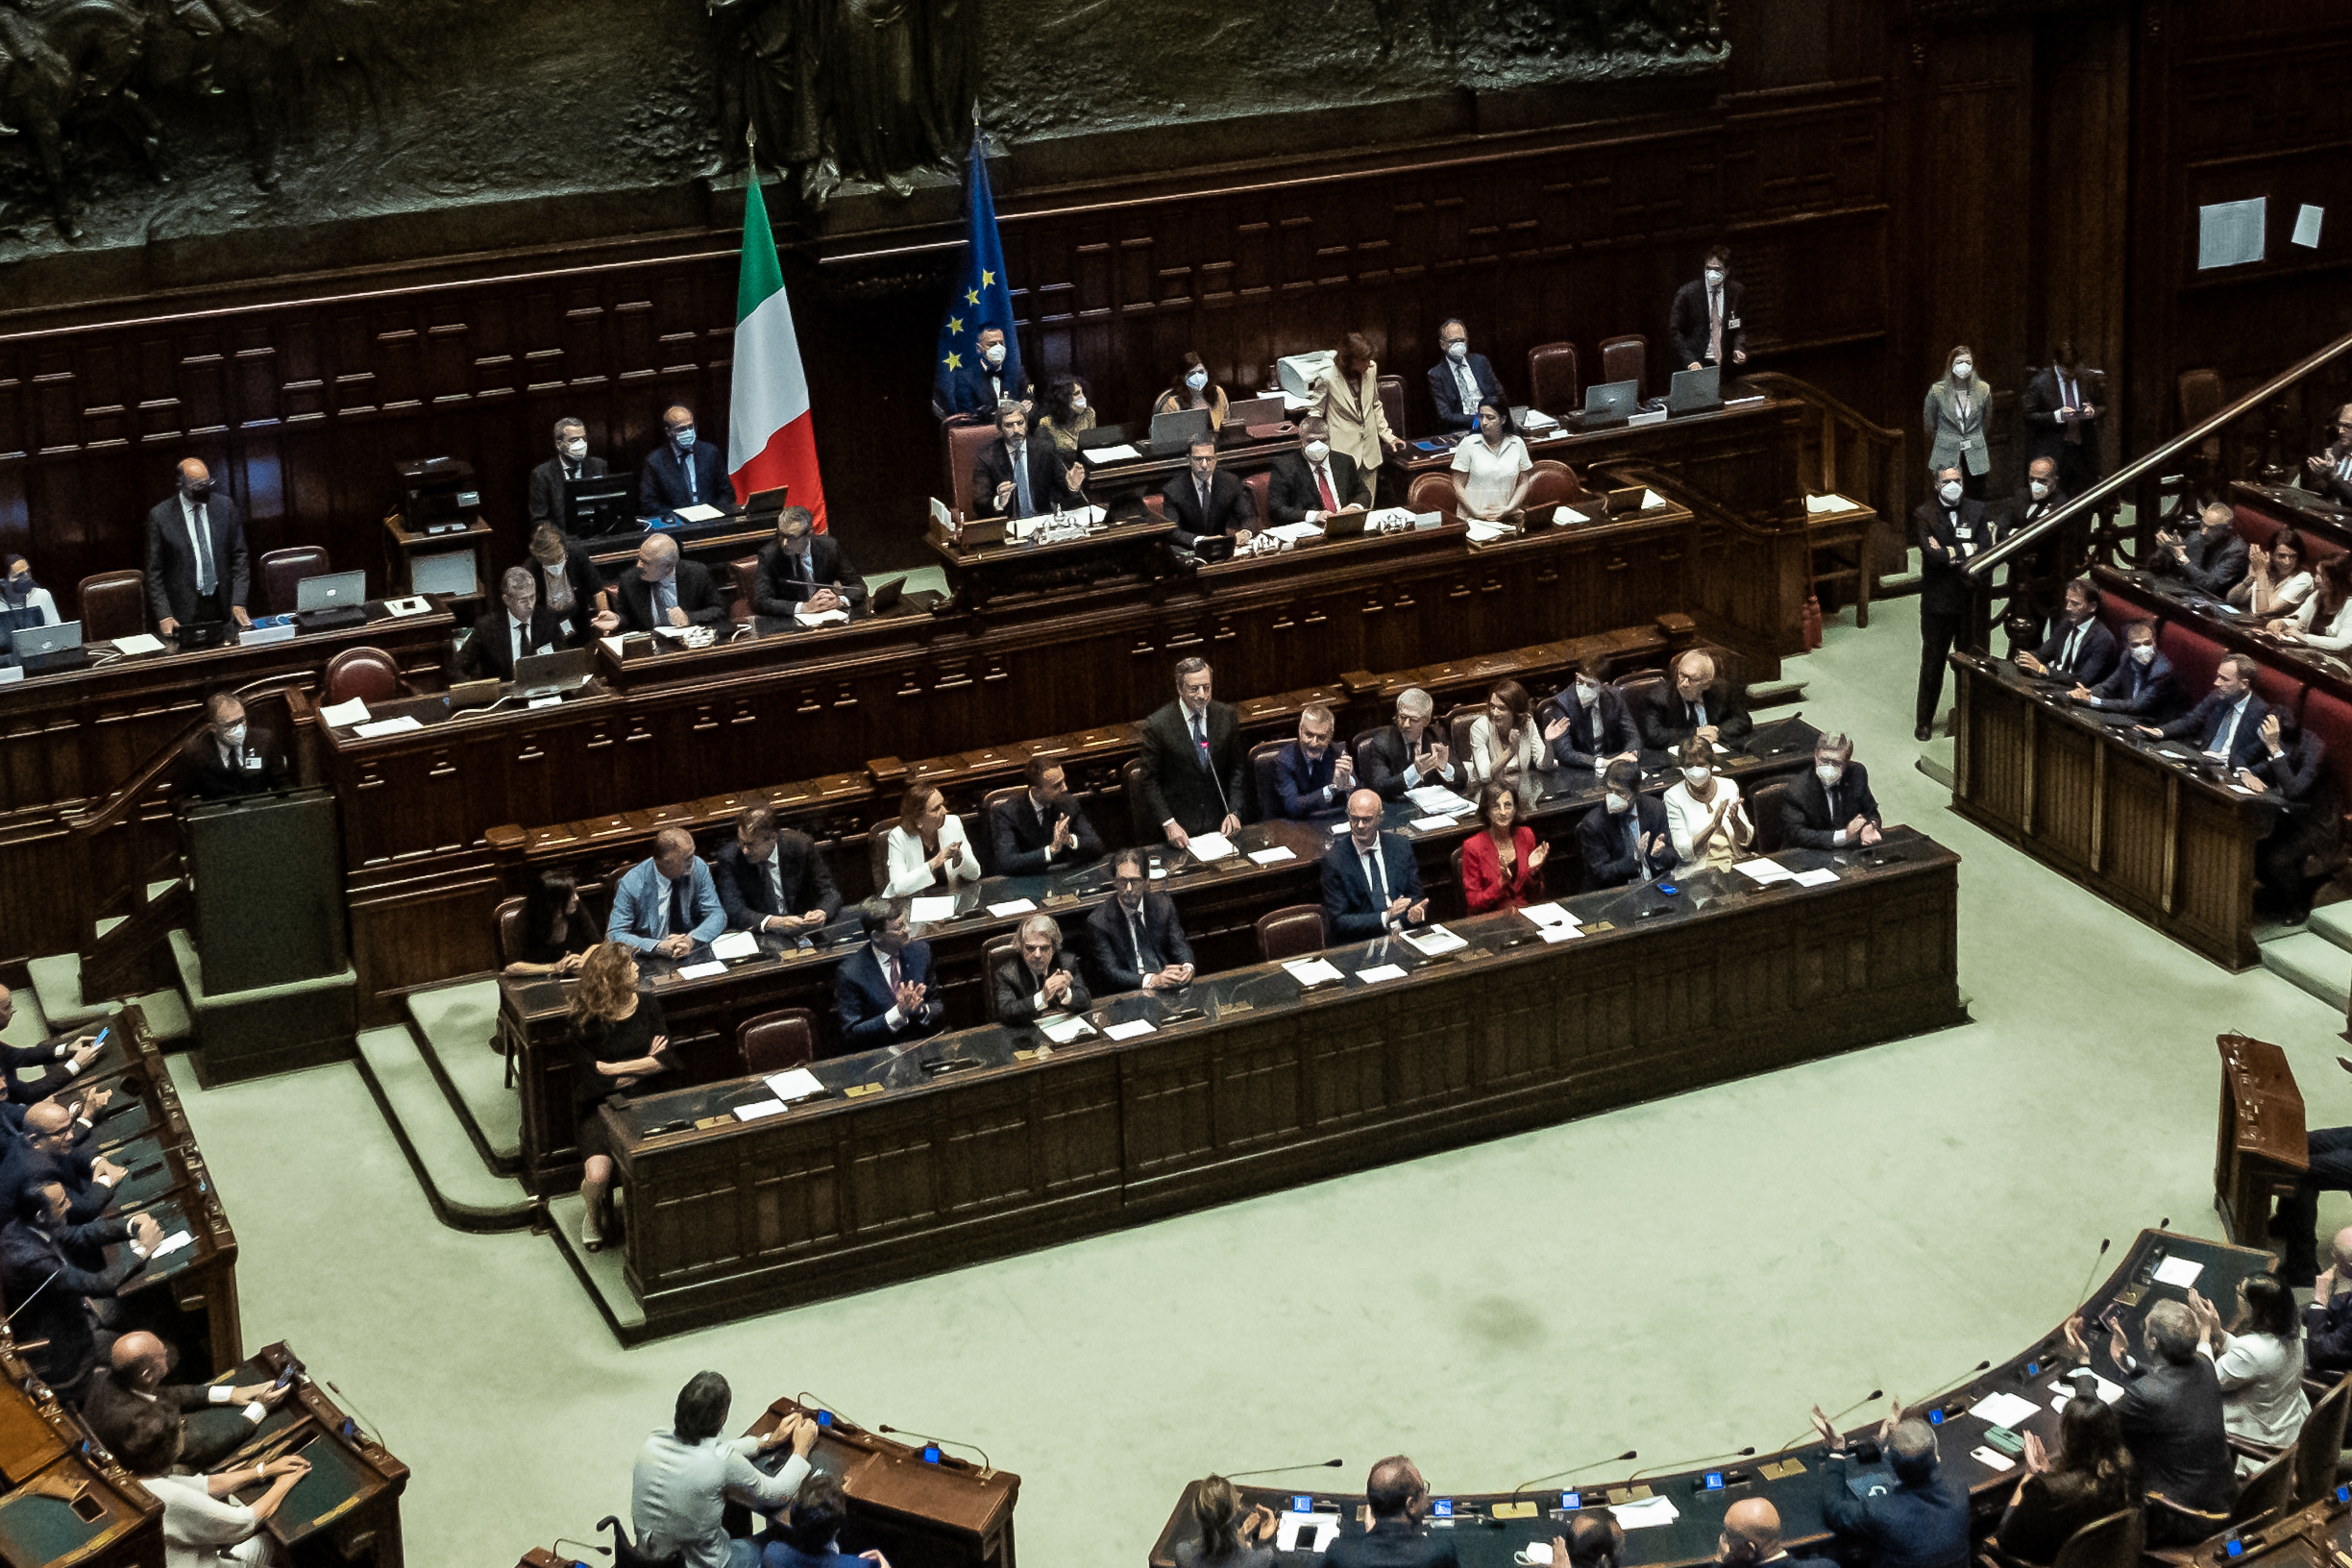 President of the Council of Ministers, Prof. Mario Draghi, announces his resignation to the Chamber of Deputies of the Italian Republic, in session, on July 21, 2022. Premier Draghi then went to the President of the Republic Sergio Mattarella to resign, President Mattarella took note and on the same day dissolved the chambers of Parliament, calling for new elections. (Photo by Manuel Dorati/NurPhoto)